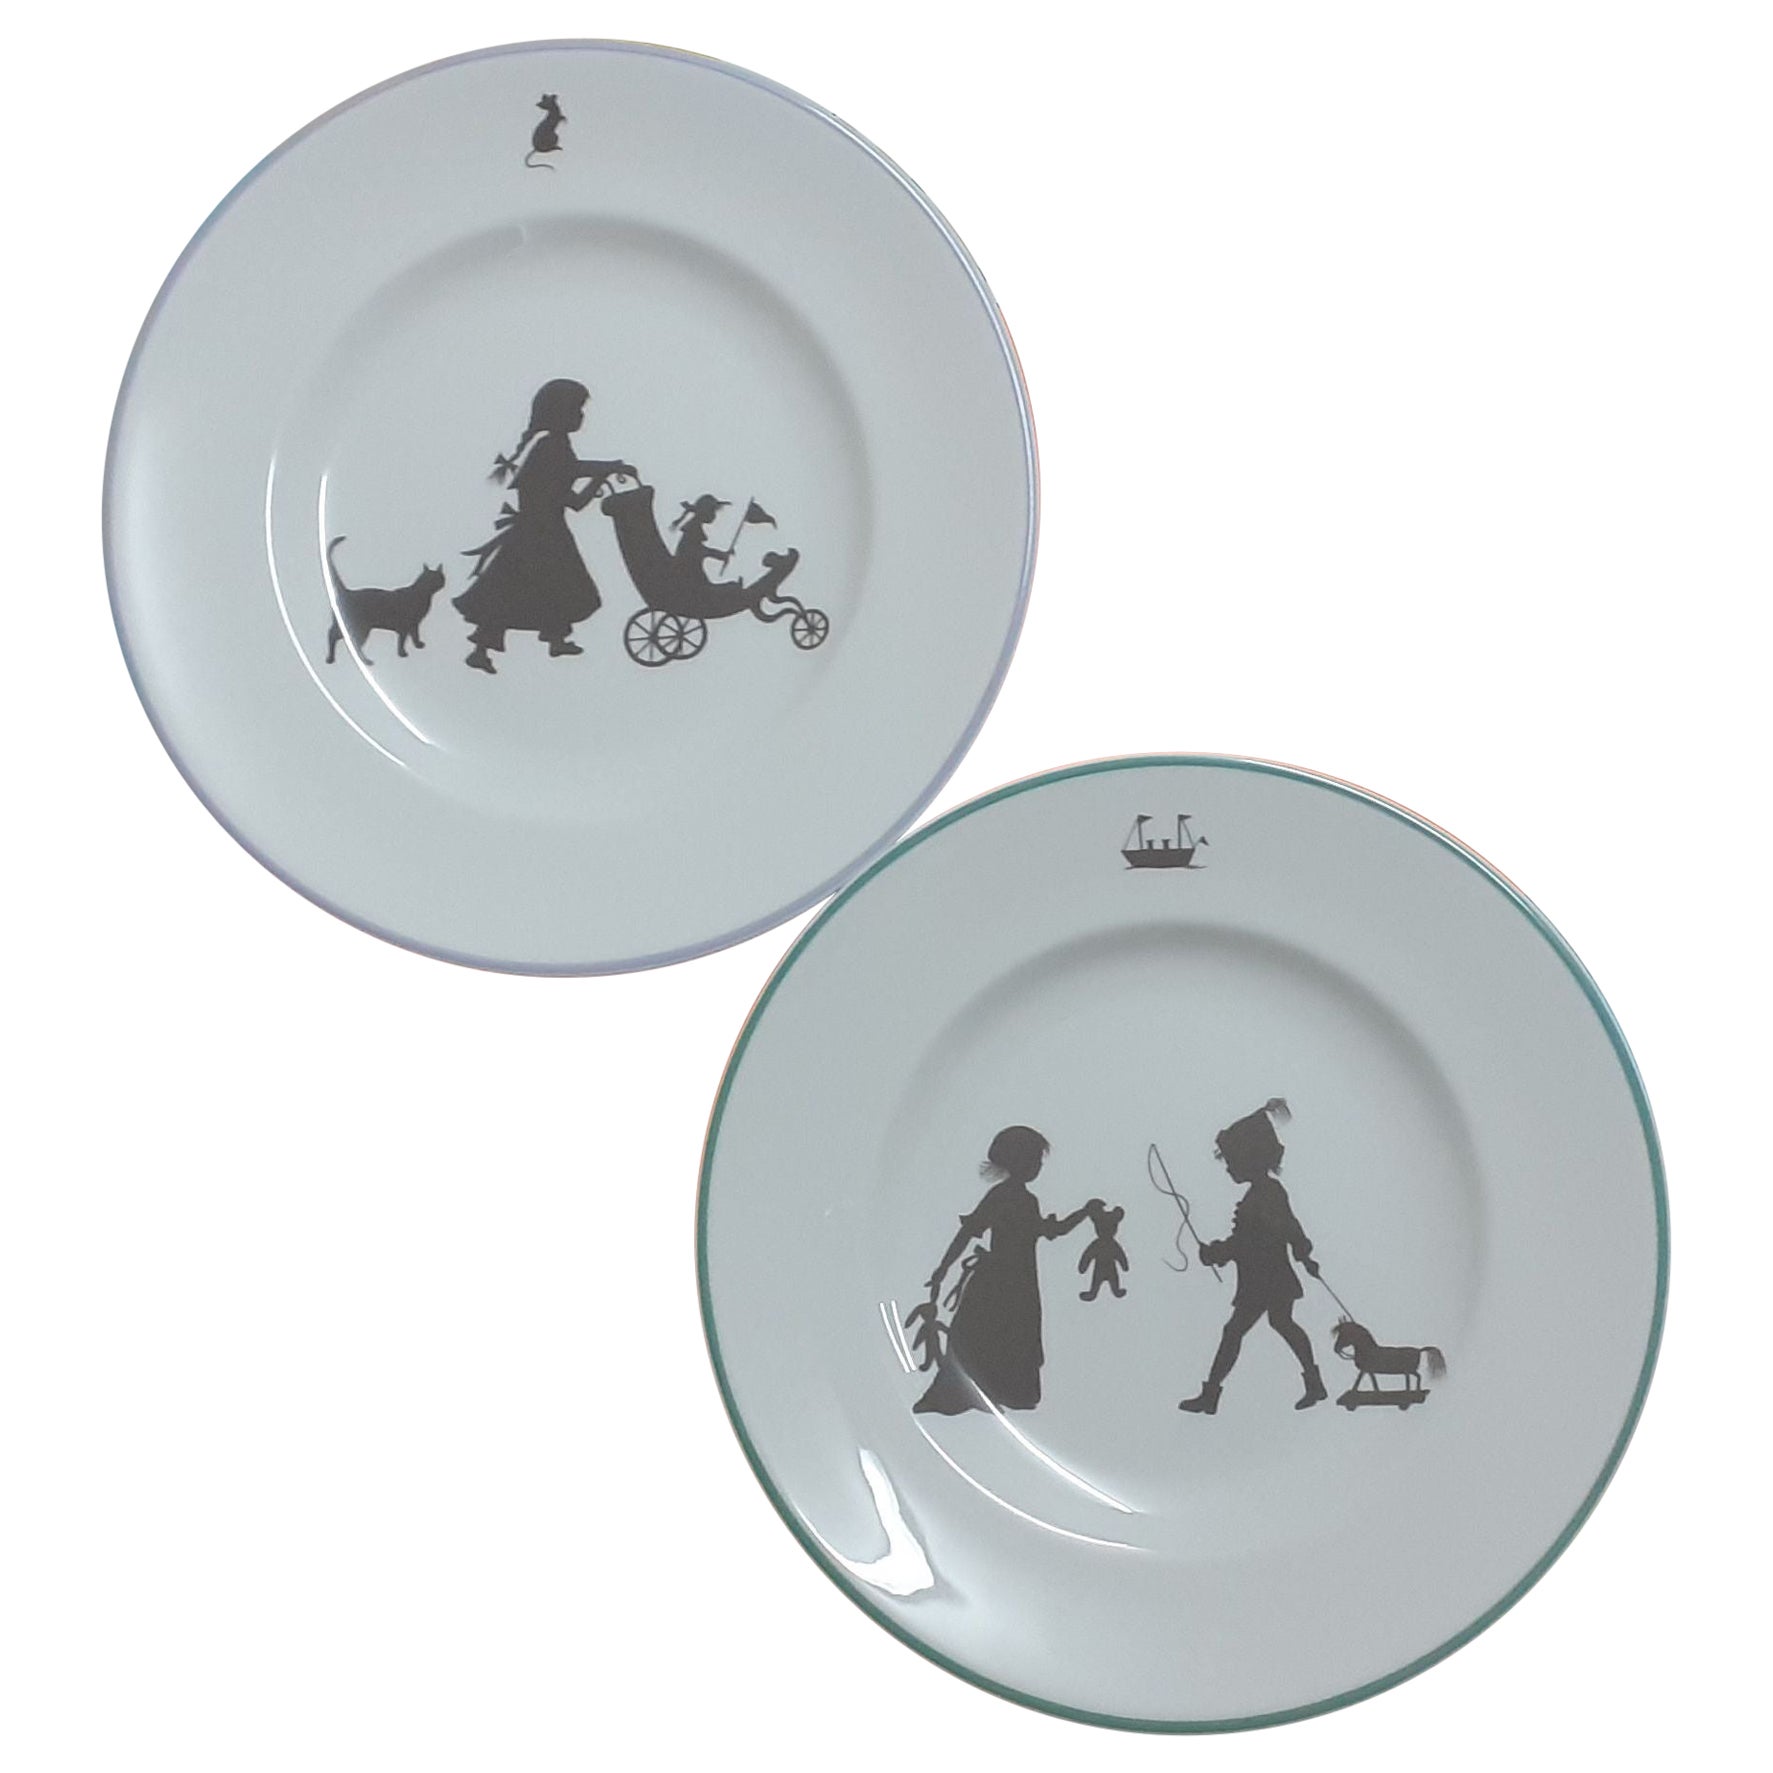 Hermès Set of 2 Plates Sihouettes Collection 